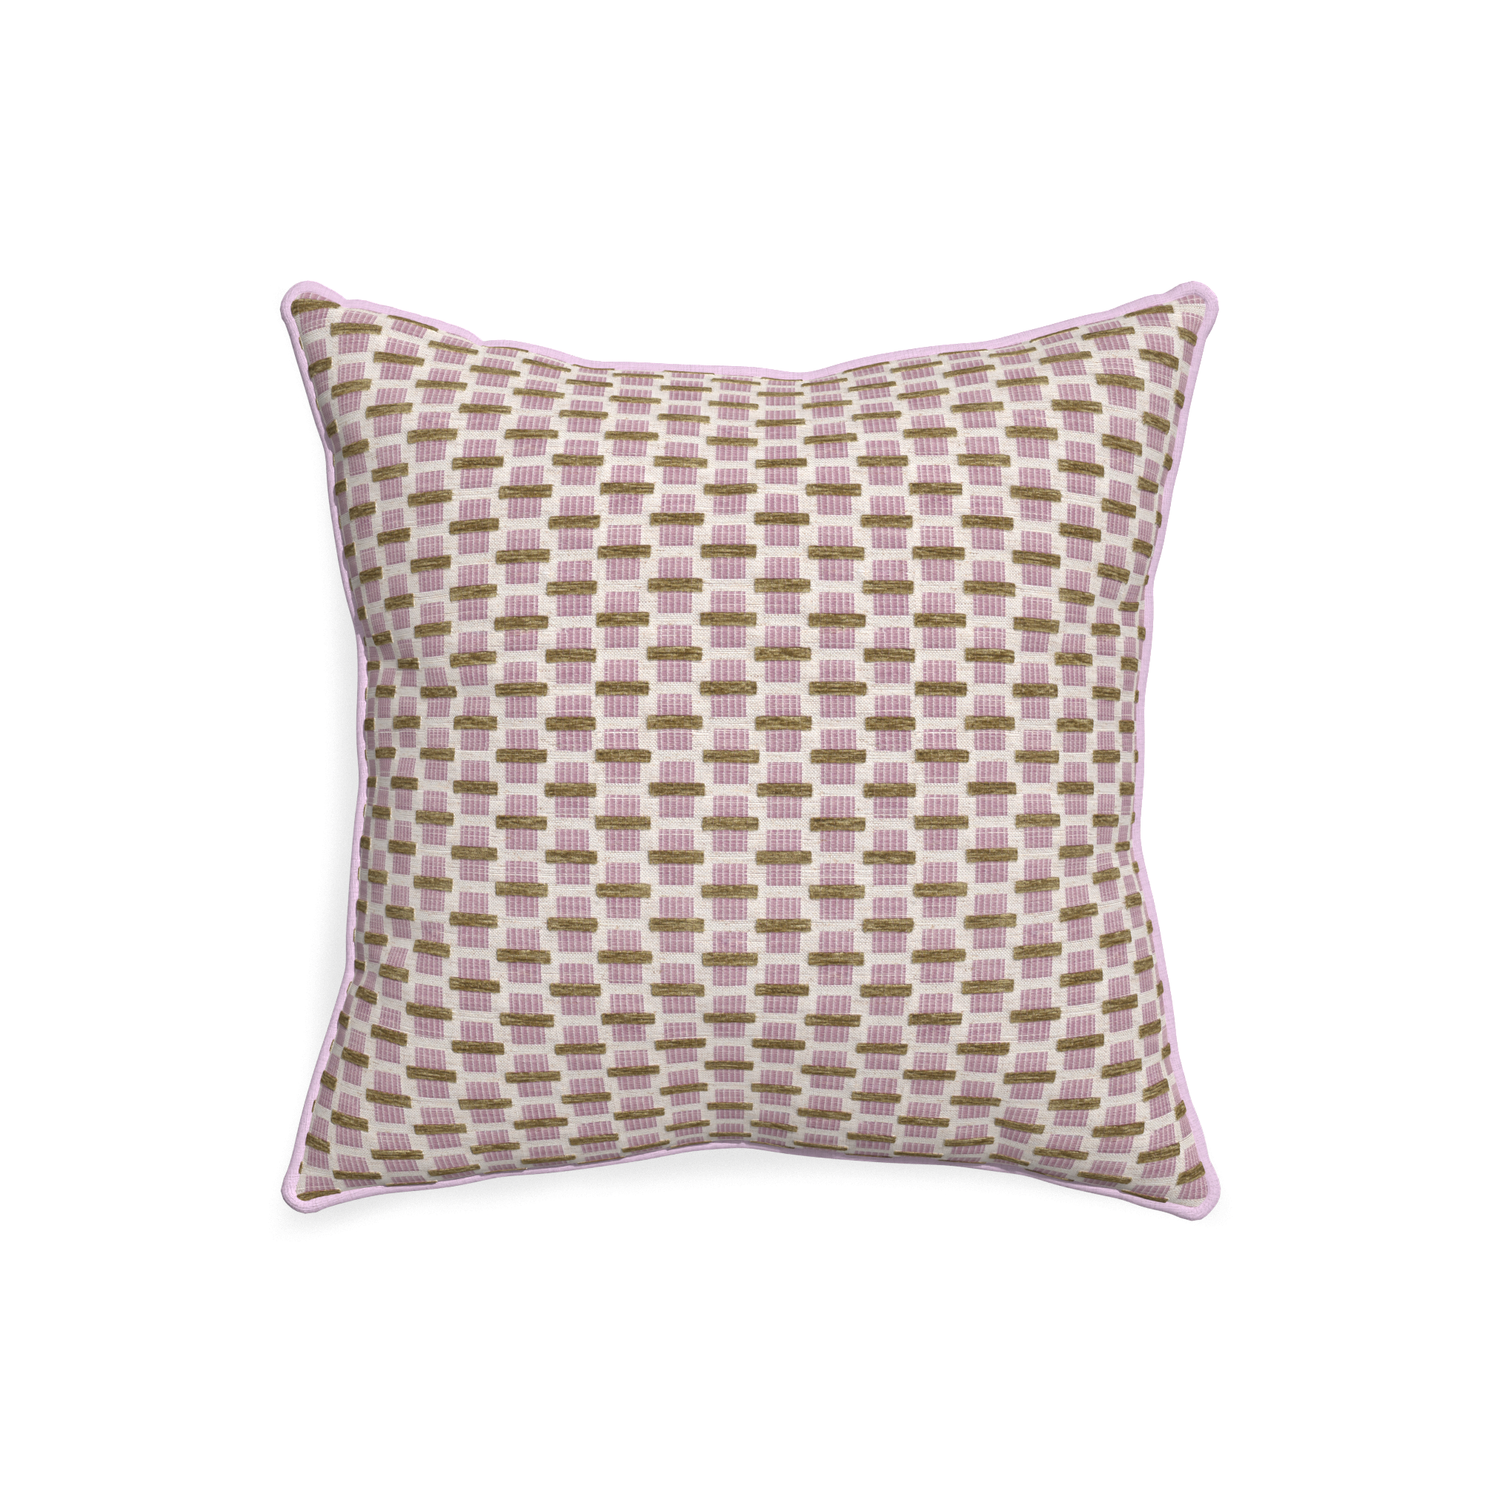 20-square willow orchid custom pink geometric chenillepillow with l piping on white background